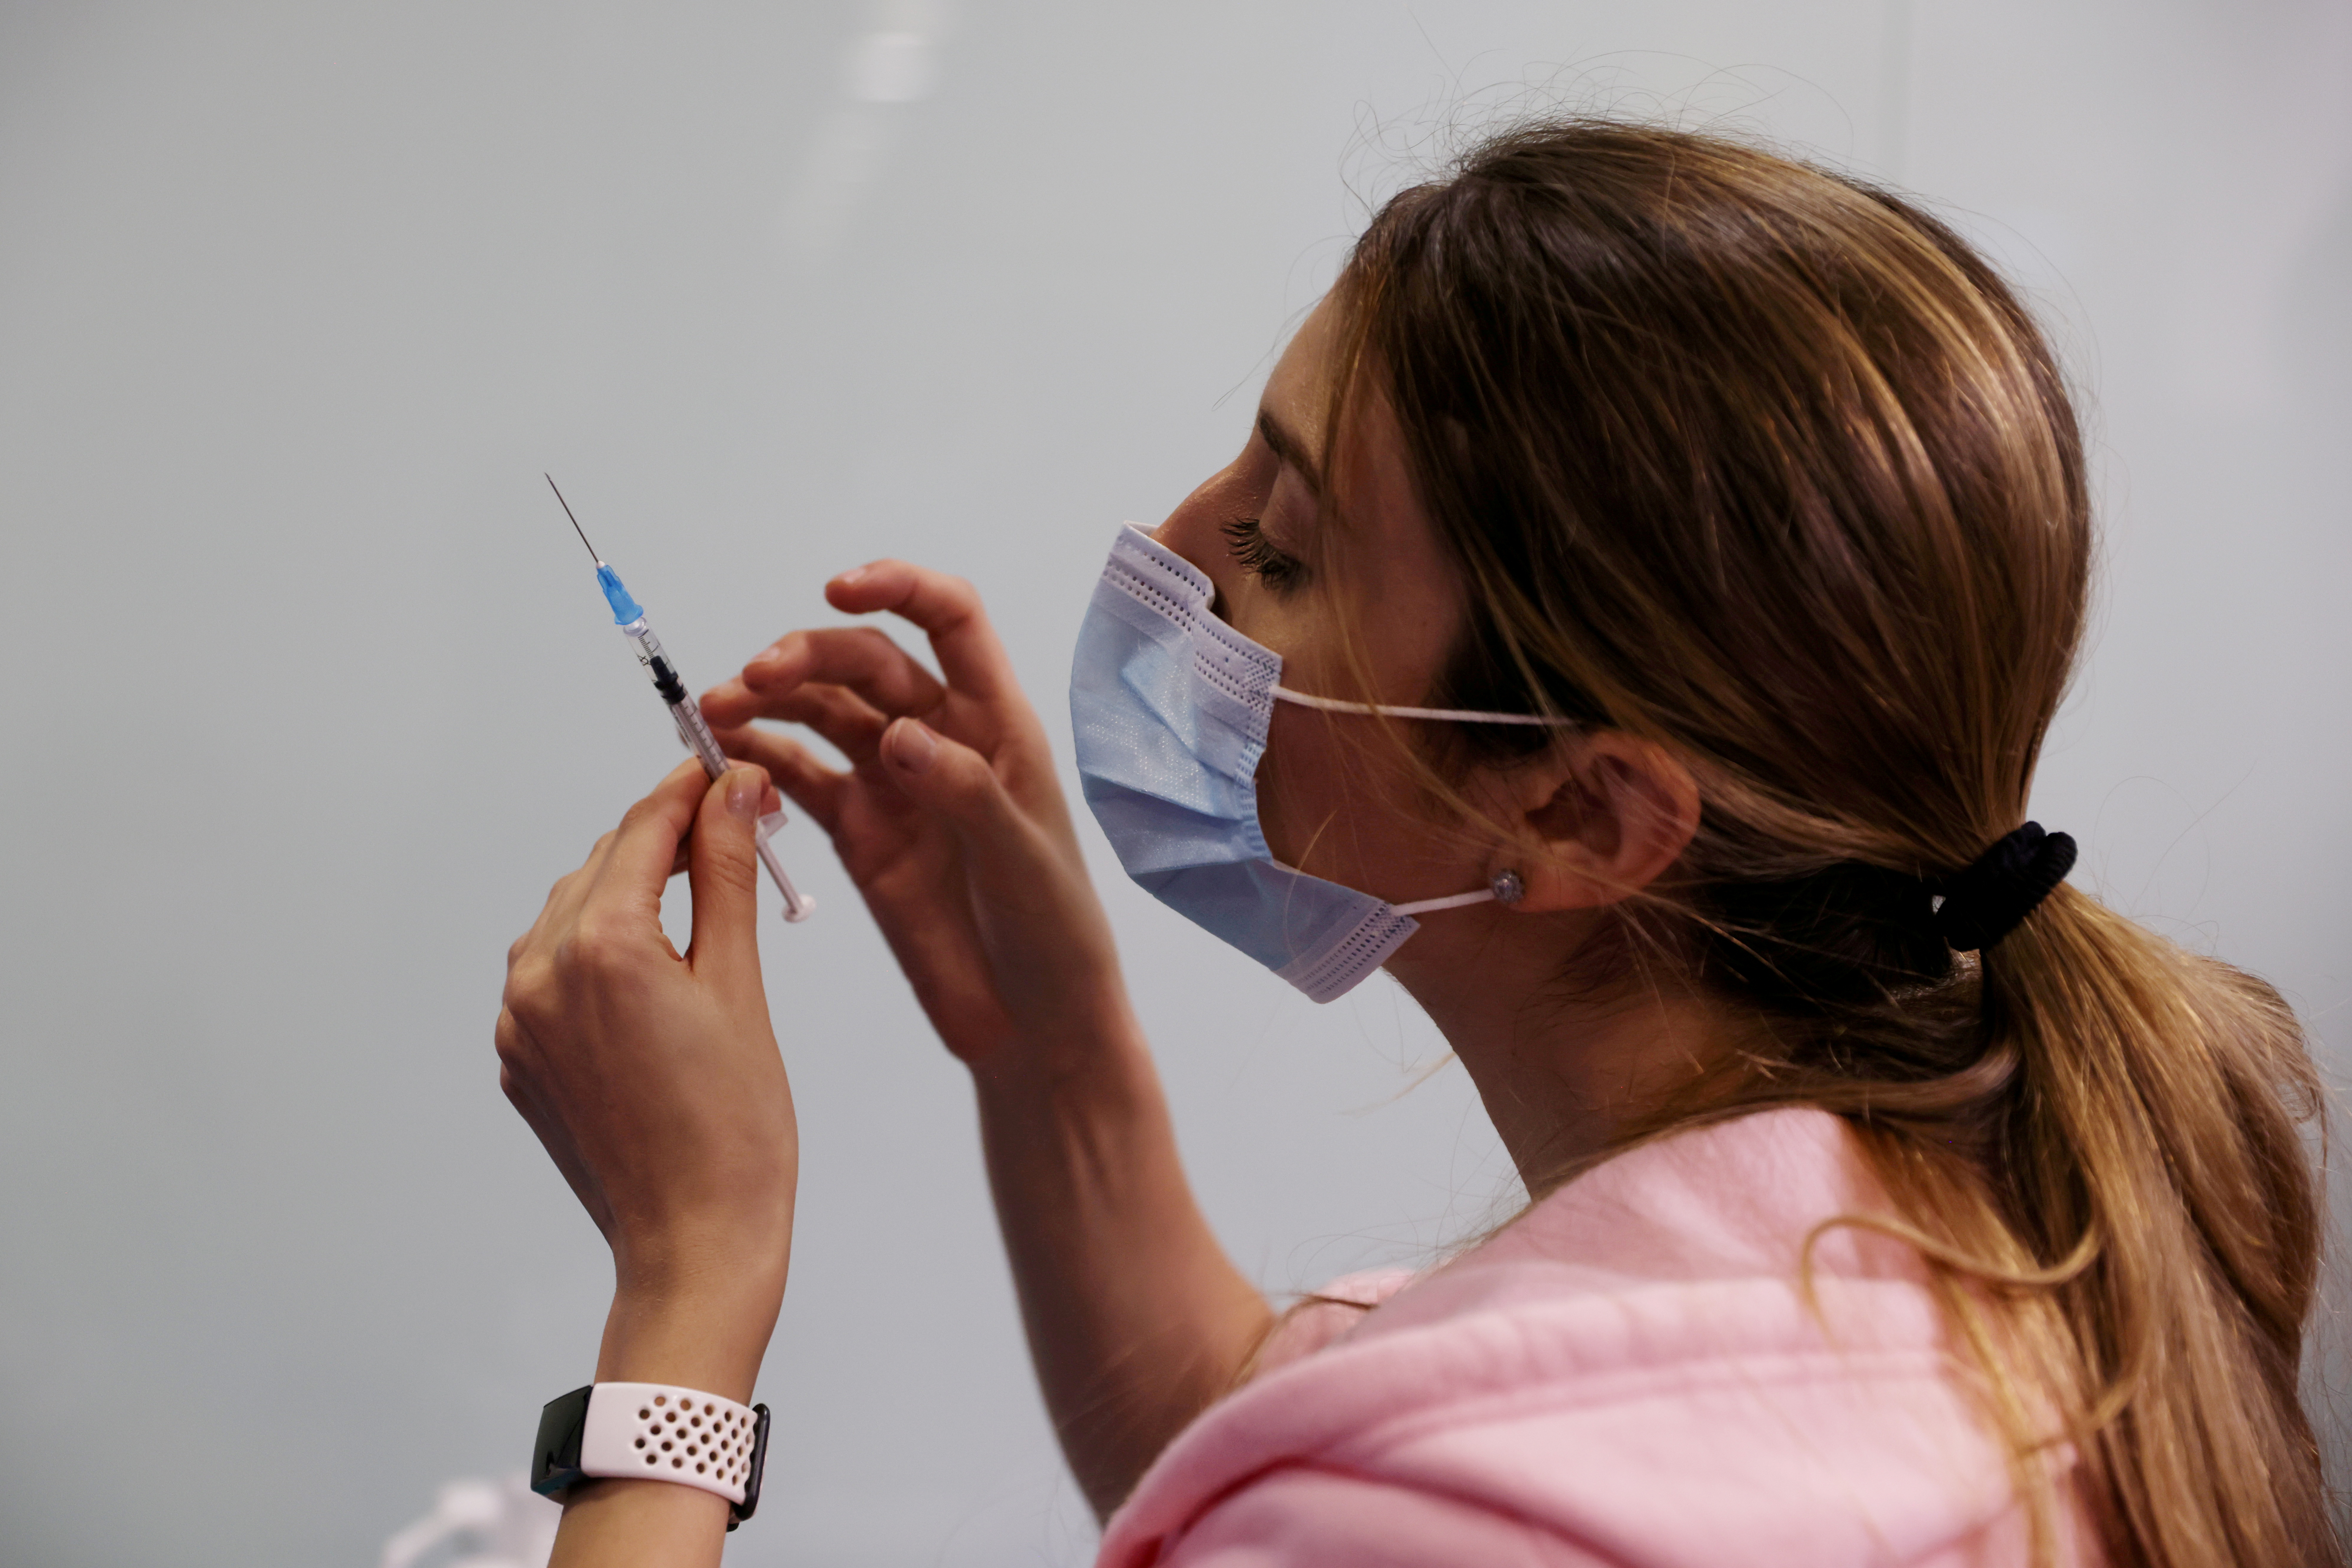 A medical worker prepares to administer a second vaccination injection against the coronavirus disease (COVID-19)  at Tel Aviv Sourasky Medical Center (Ichilov Hospital) in Tel Aviv